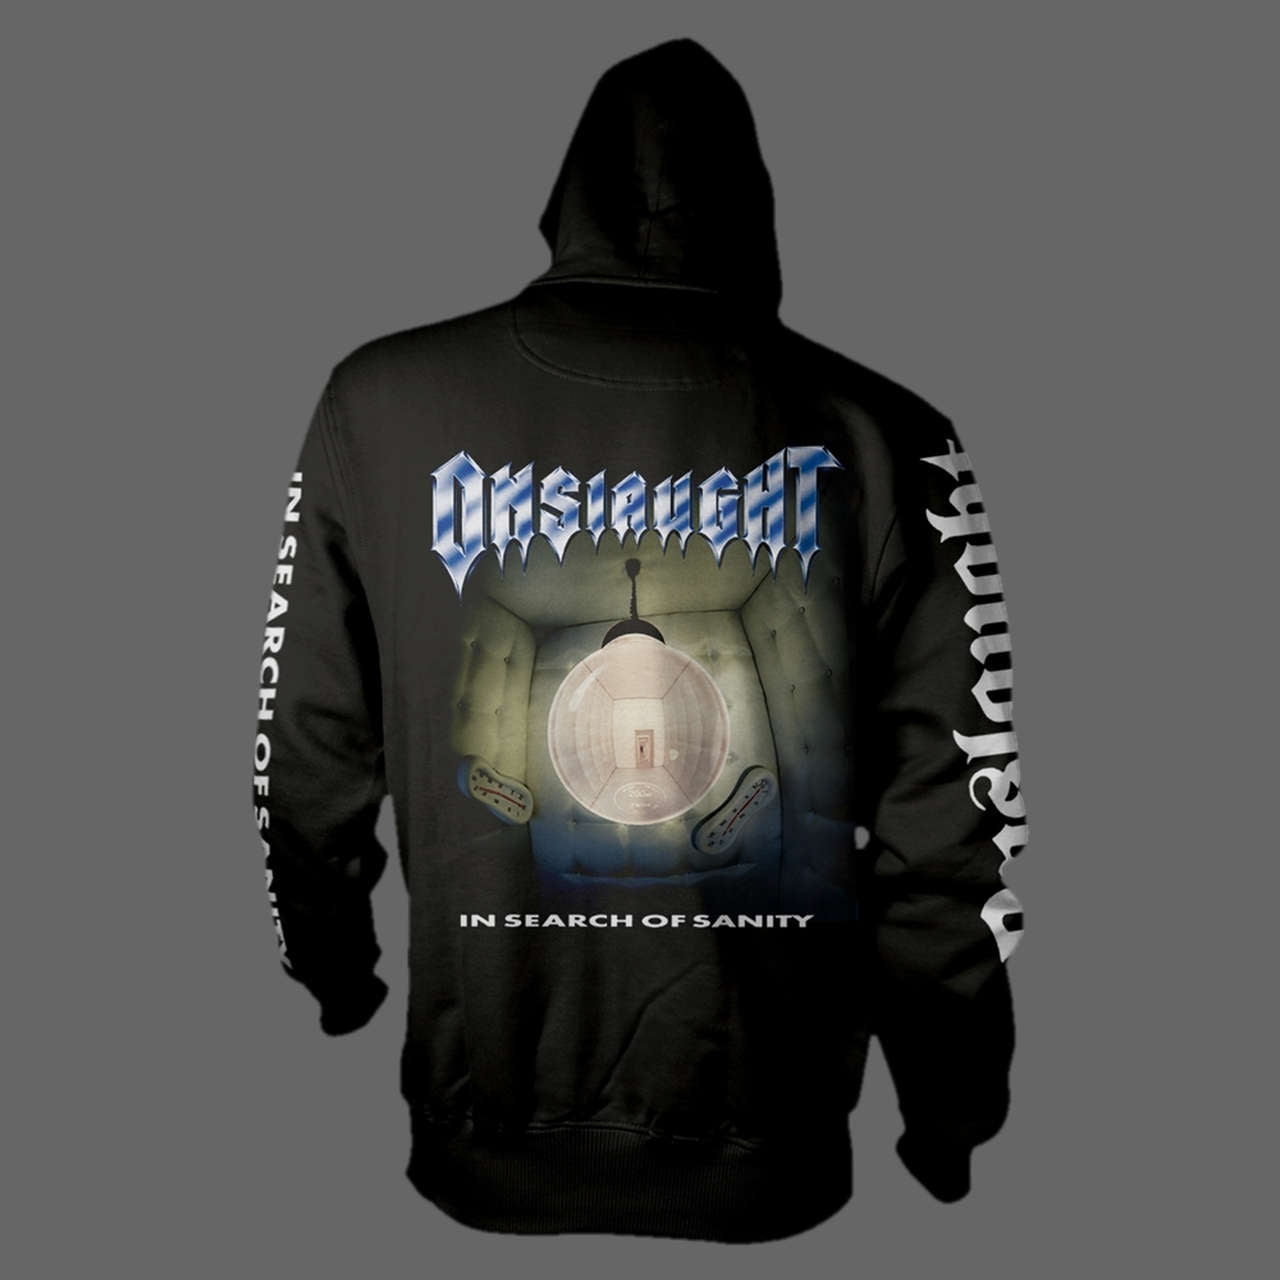 Onslaught - In Search of Sanity (Hoodie)